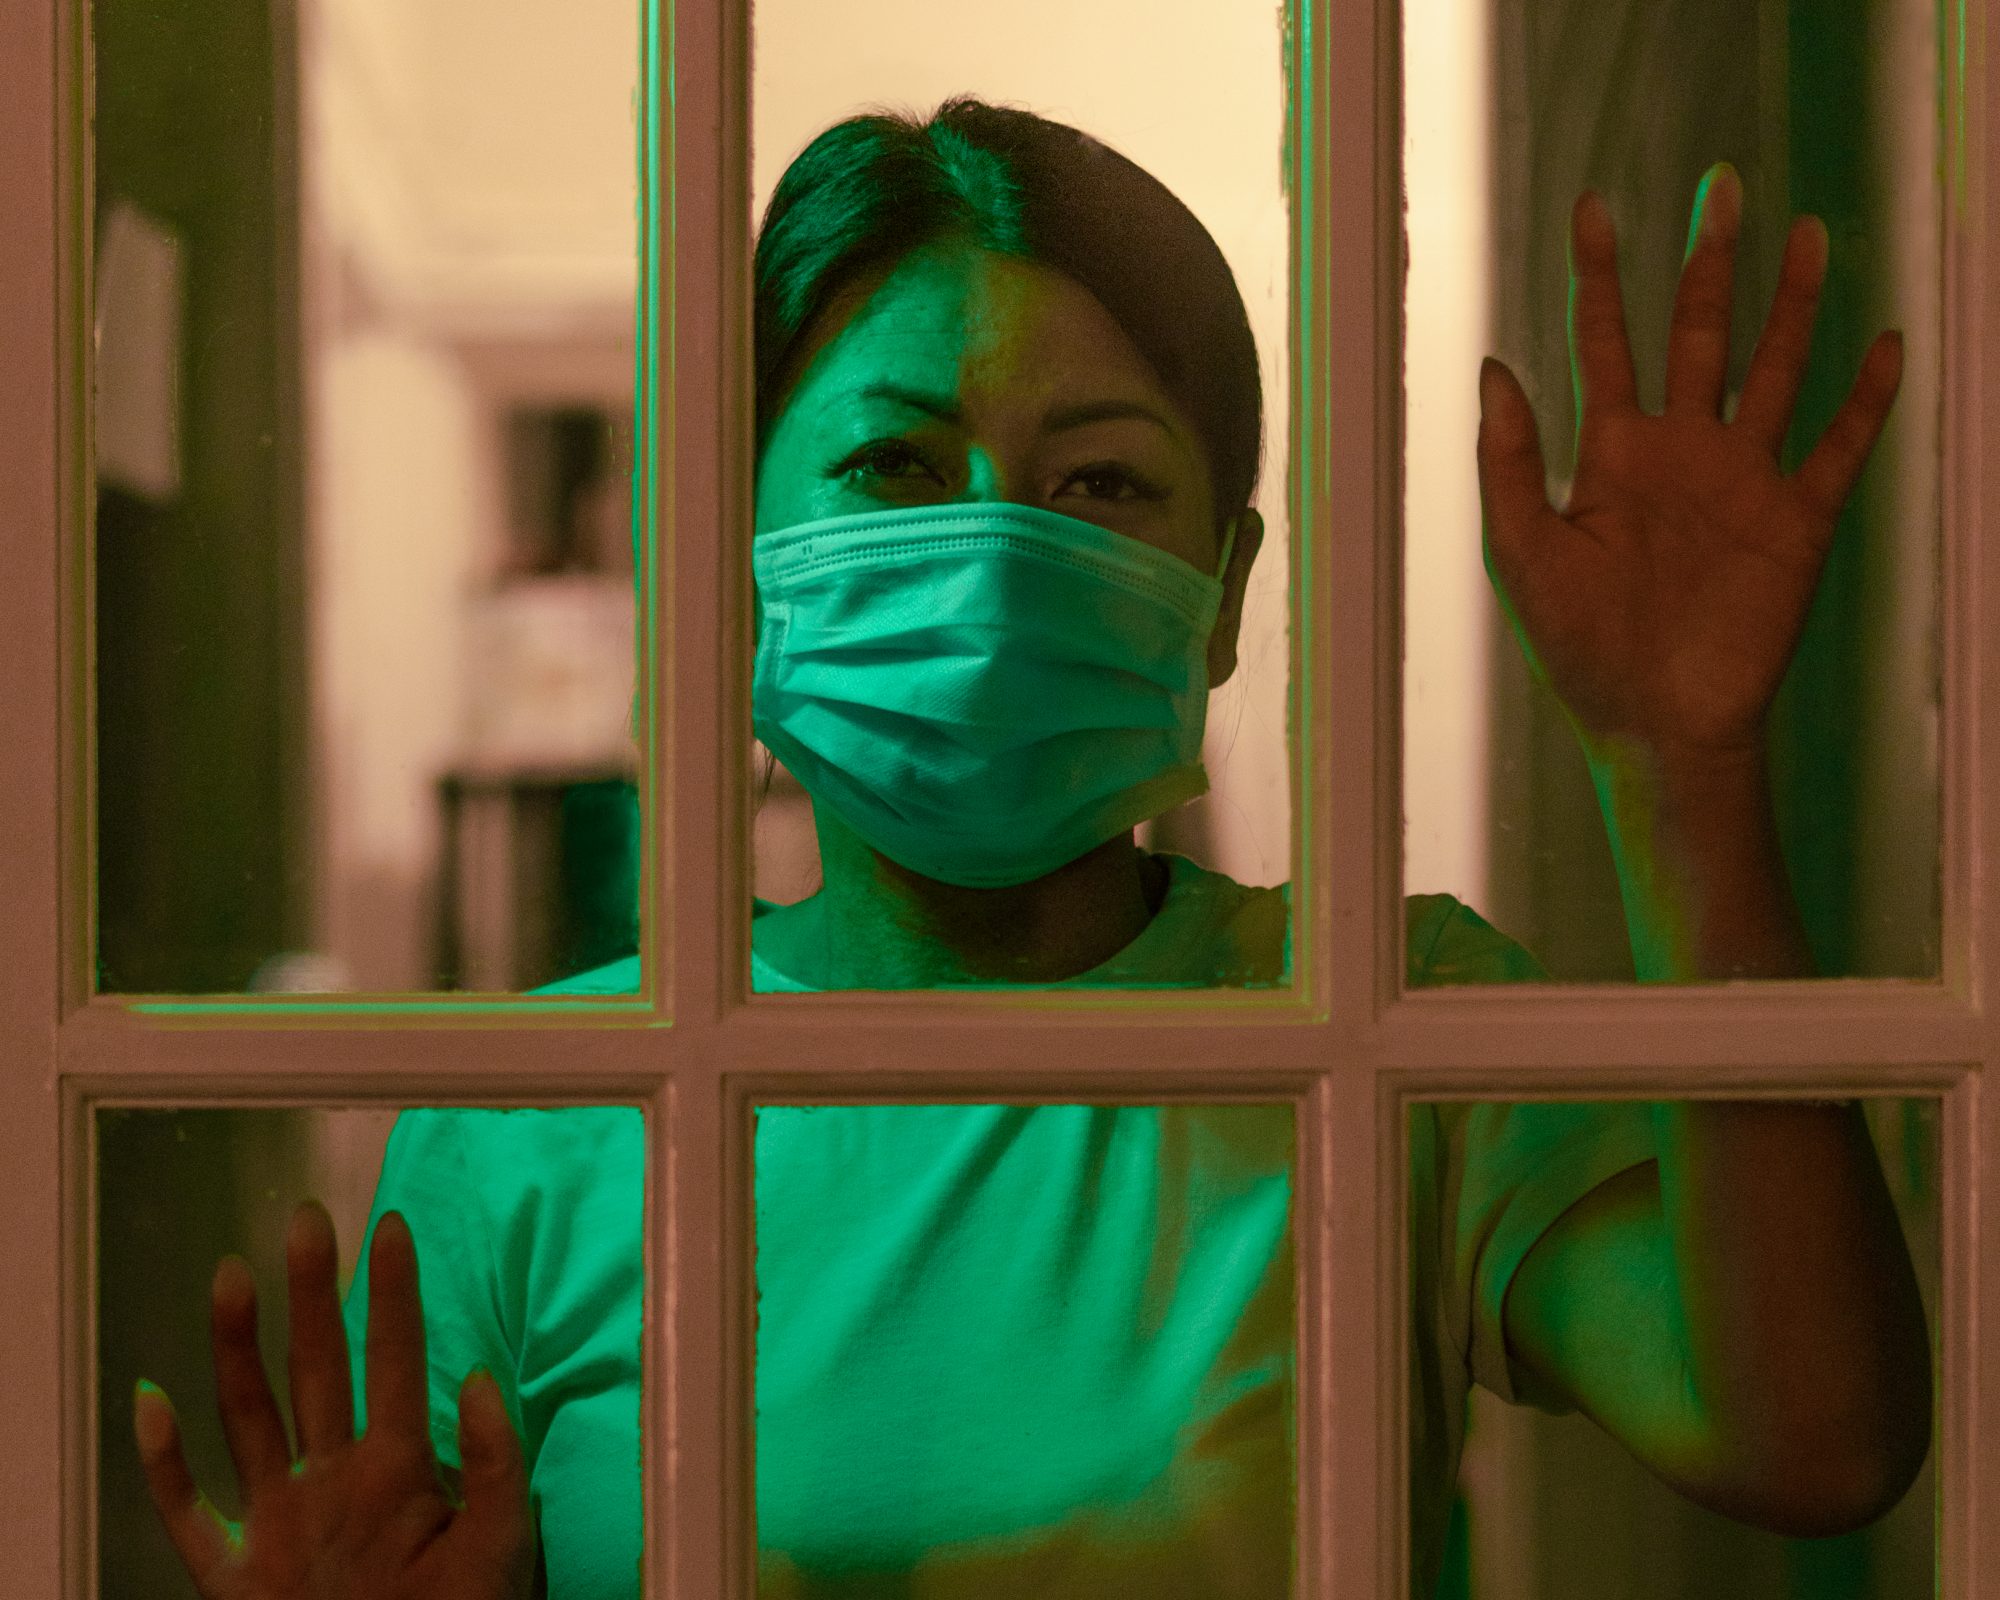 A woman looking through a window, wearing a surgical mask.